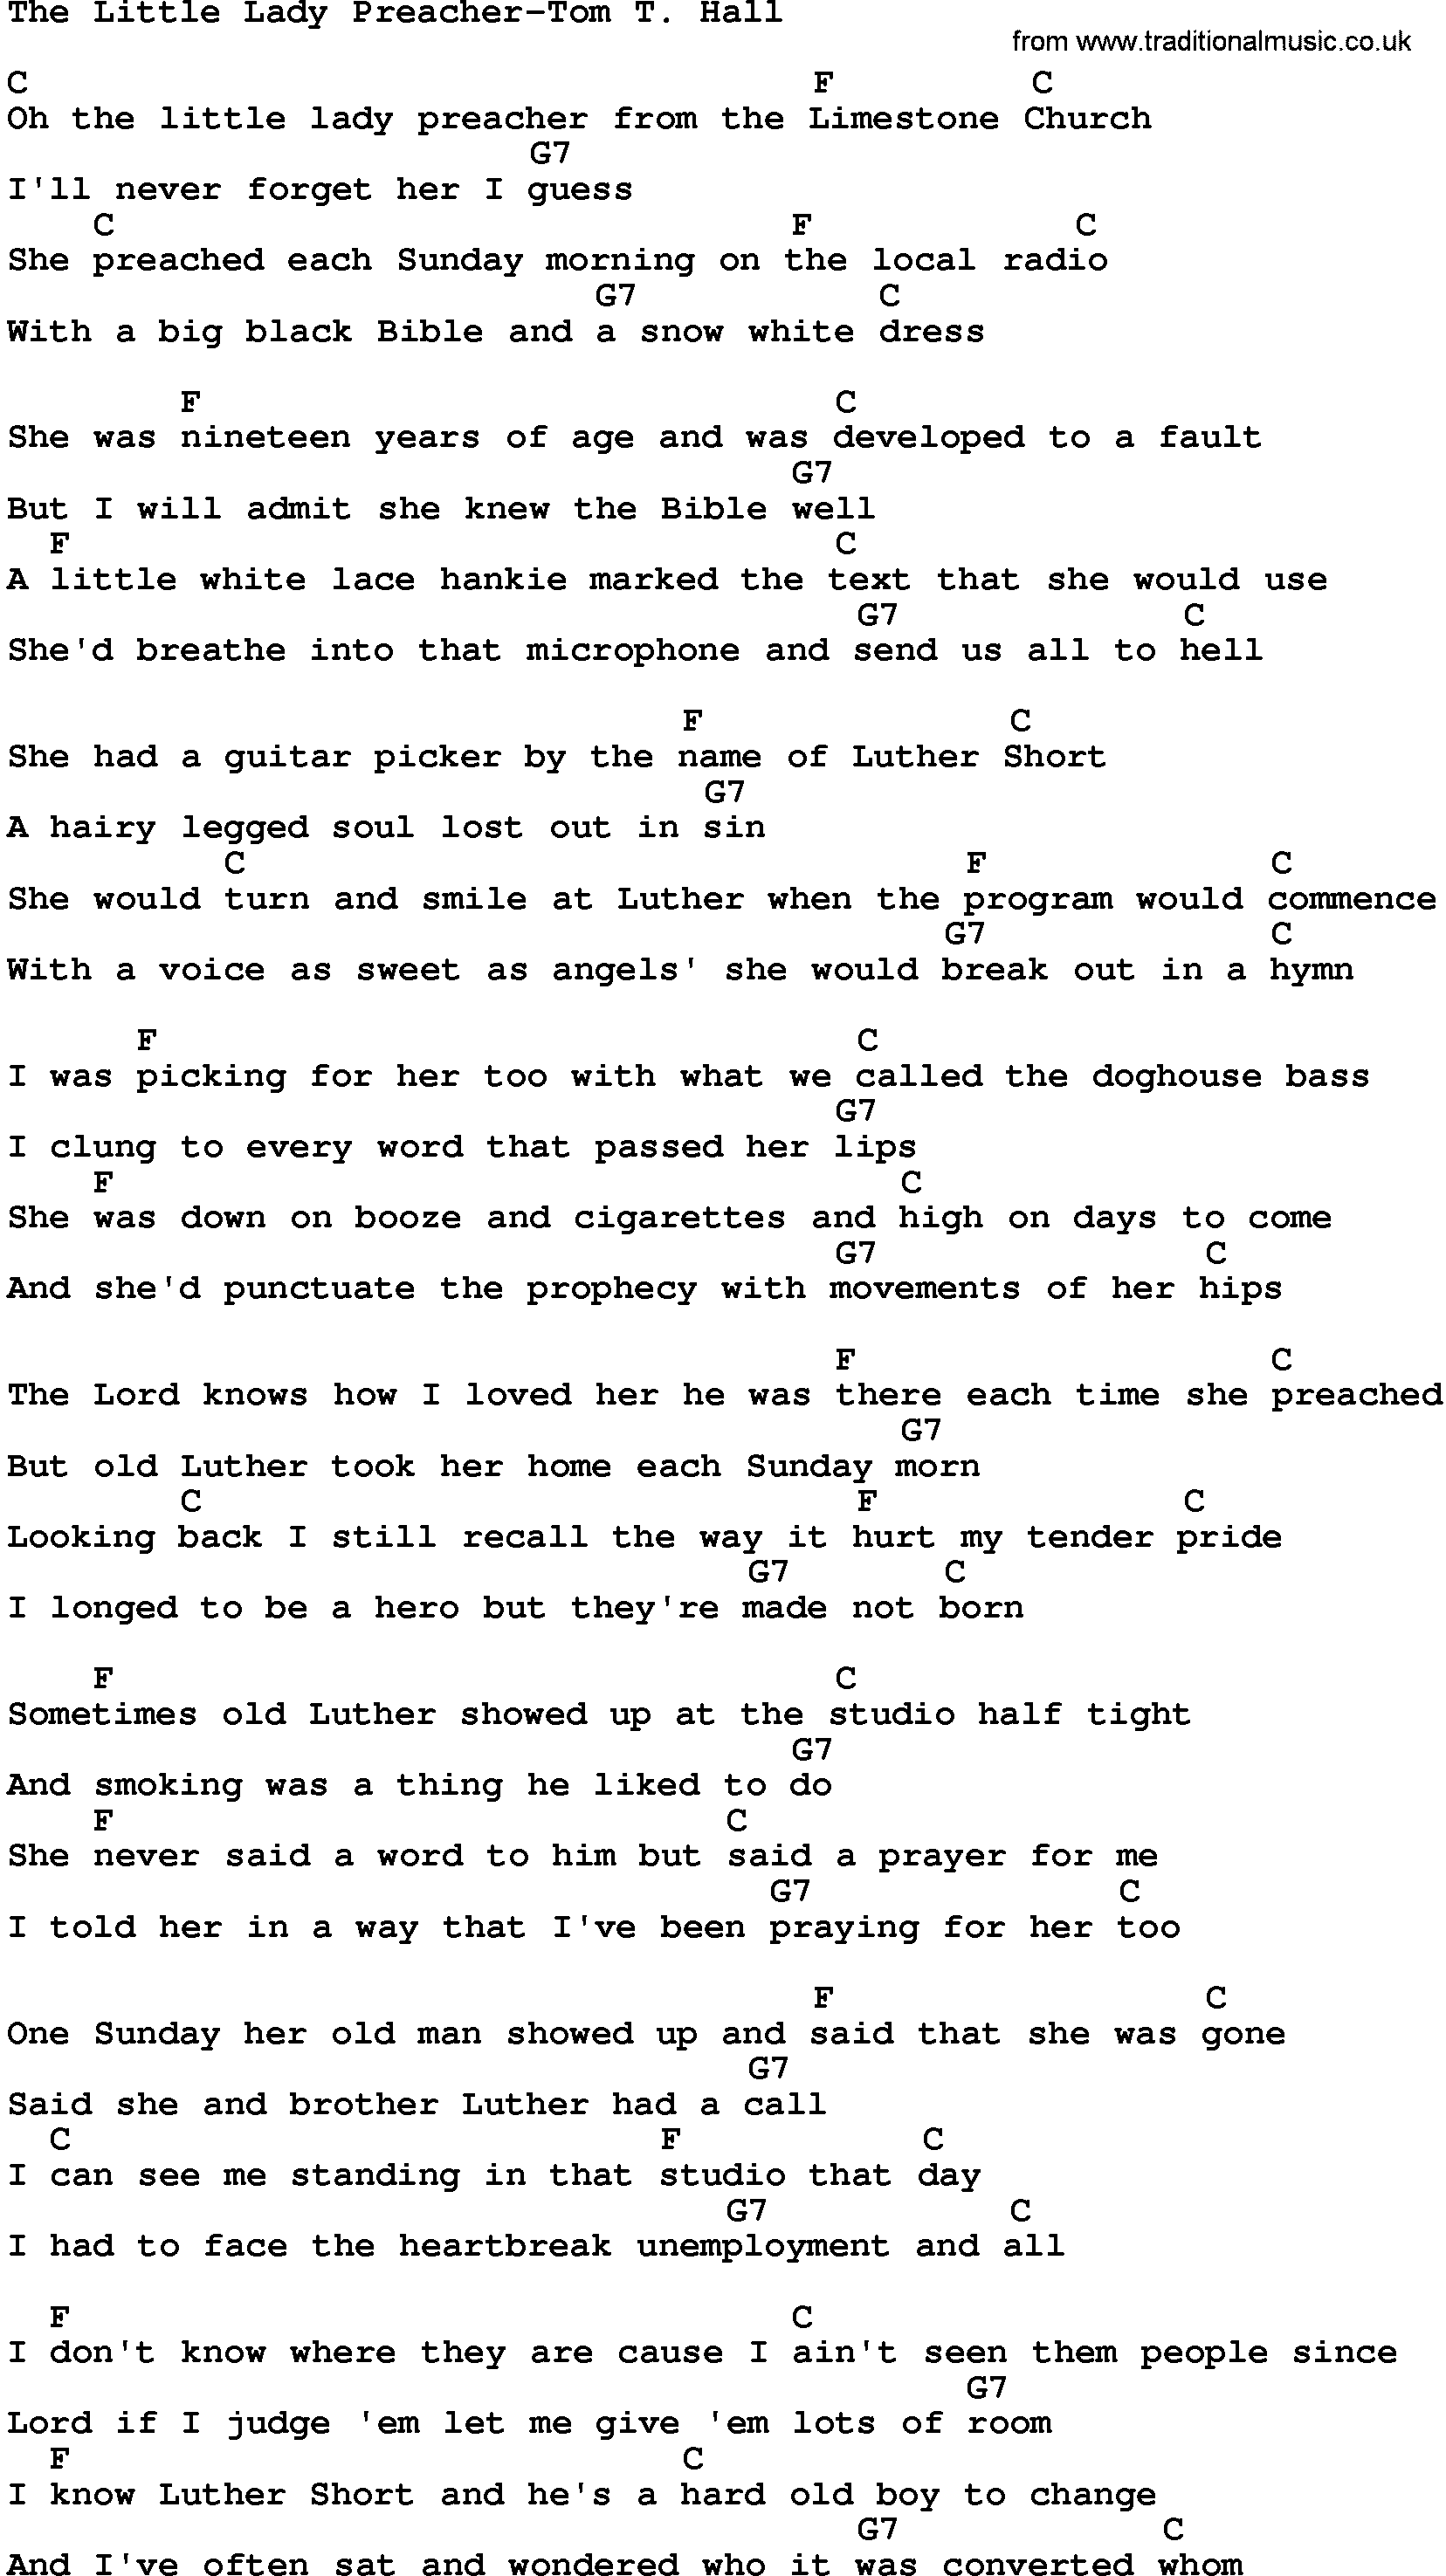 Country music song: The Little Lady Preacher-Tom T Hall lyrics and chords